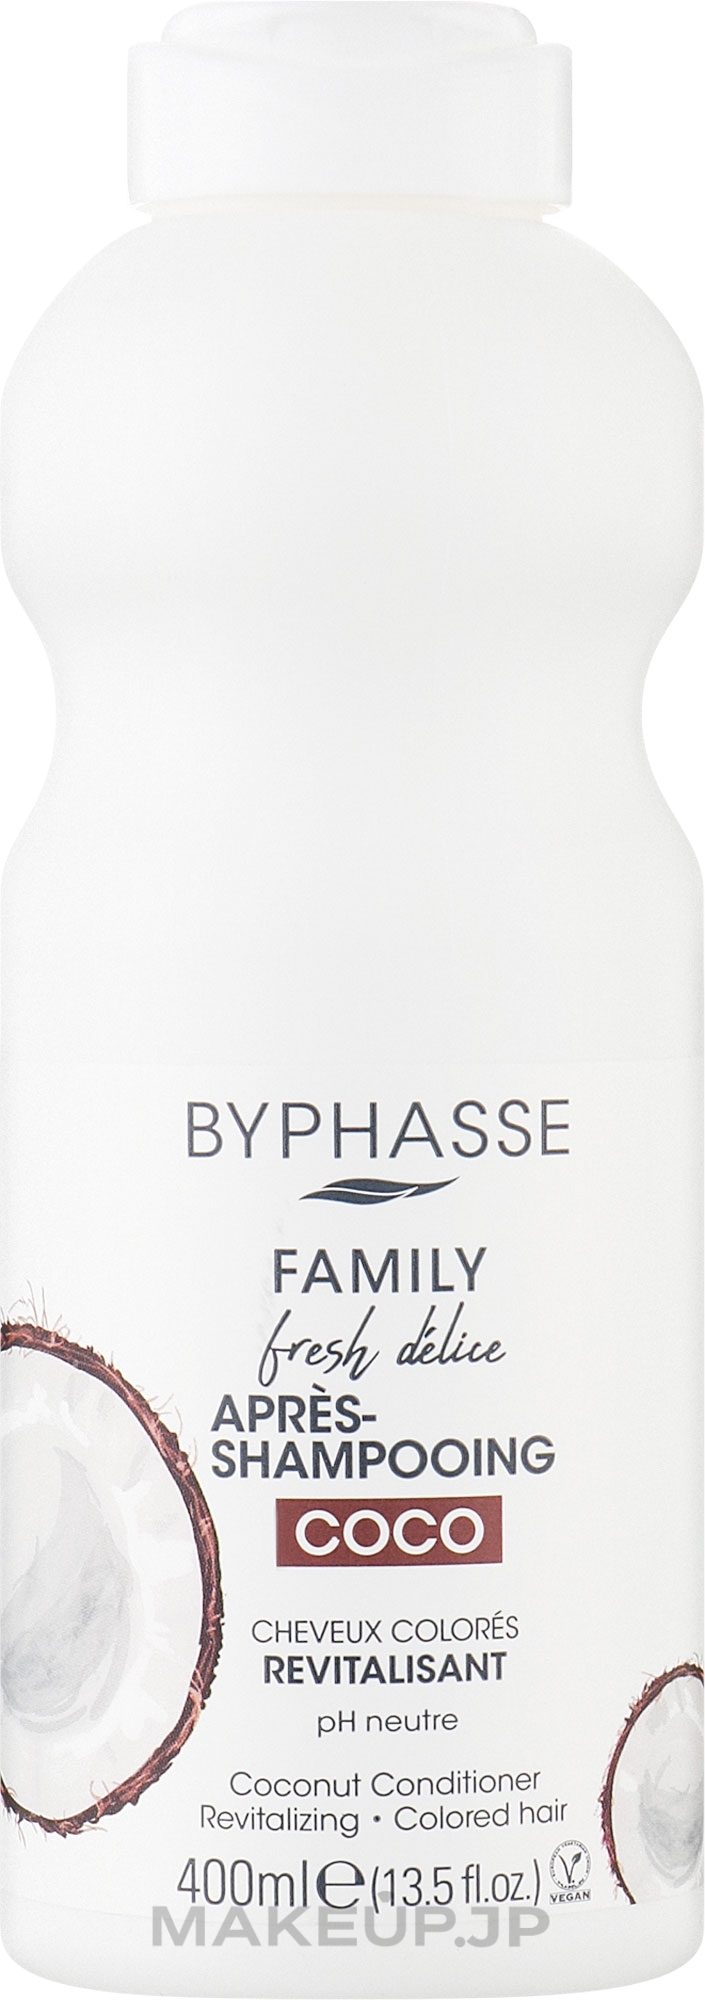 Coconut Conditioner for Colored Hair - Byphasse Family Fresh Delice Conditioner — photo 400 ml